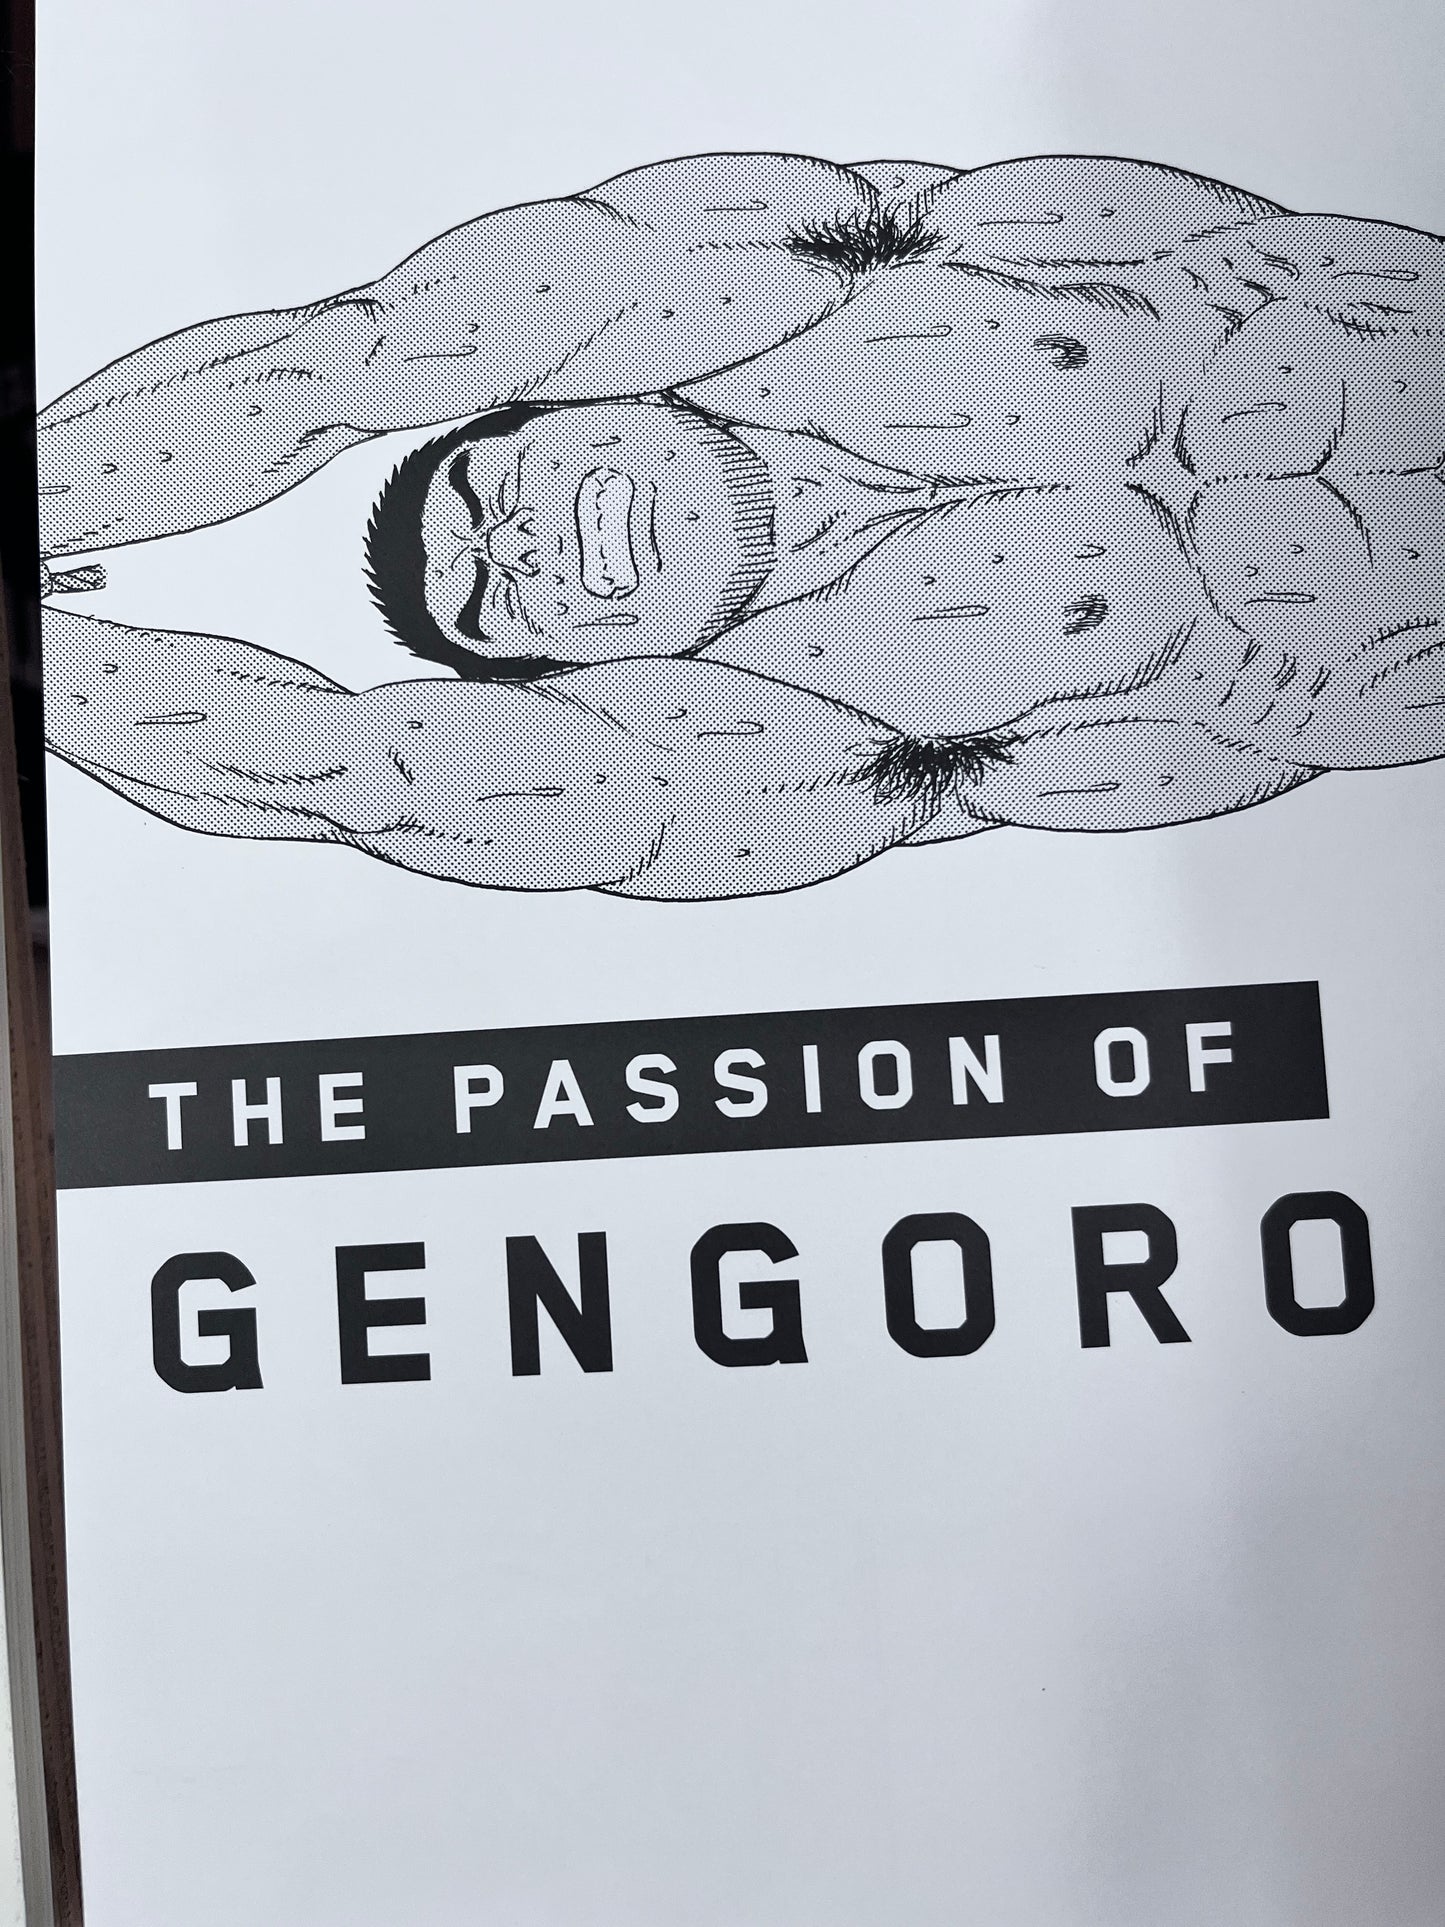 The Passion of Gengoroh Tagame: Master of Gay Erotic Manga Vol. 2